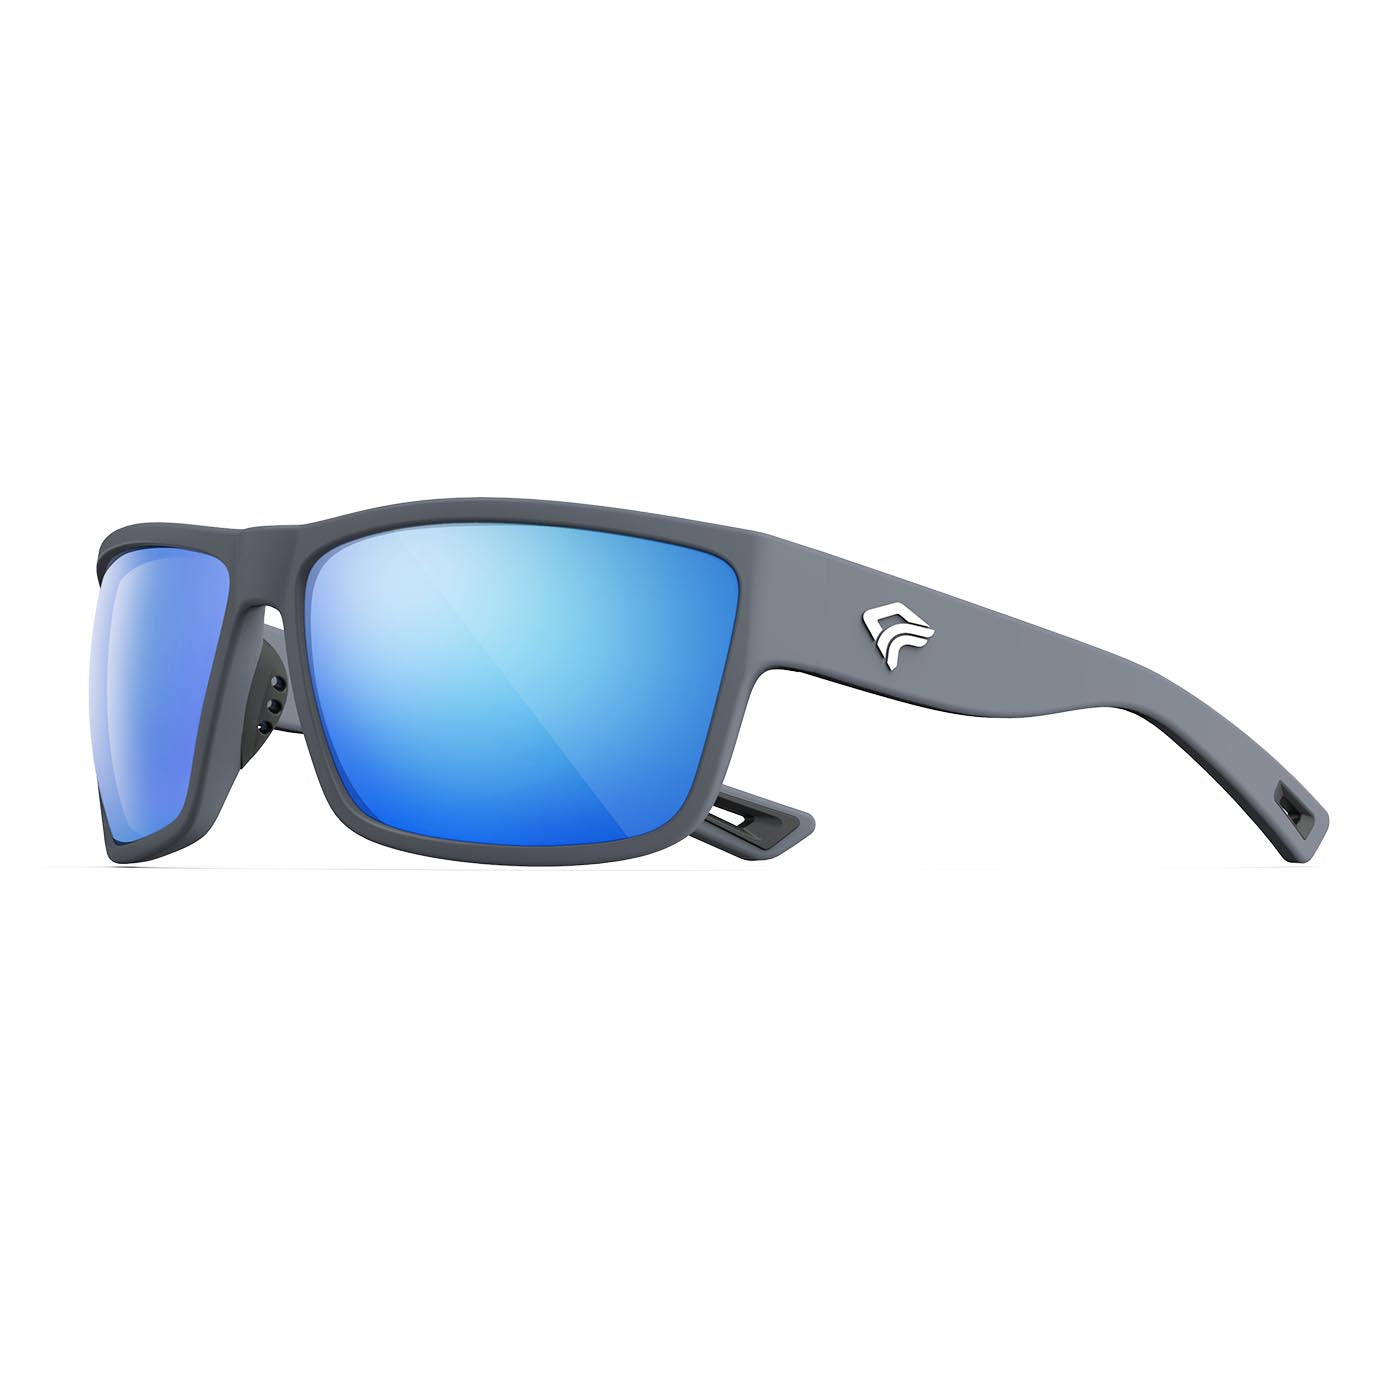 Pure Polarized Grey and Sunglasses - Adjustable Lifetime Cycling, Golf, for Frame Matte - Transparent Flexible Sports with - and and Women Running, Warranty for - To Men Half Fishing Ideal Ideal